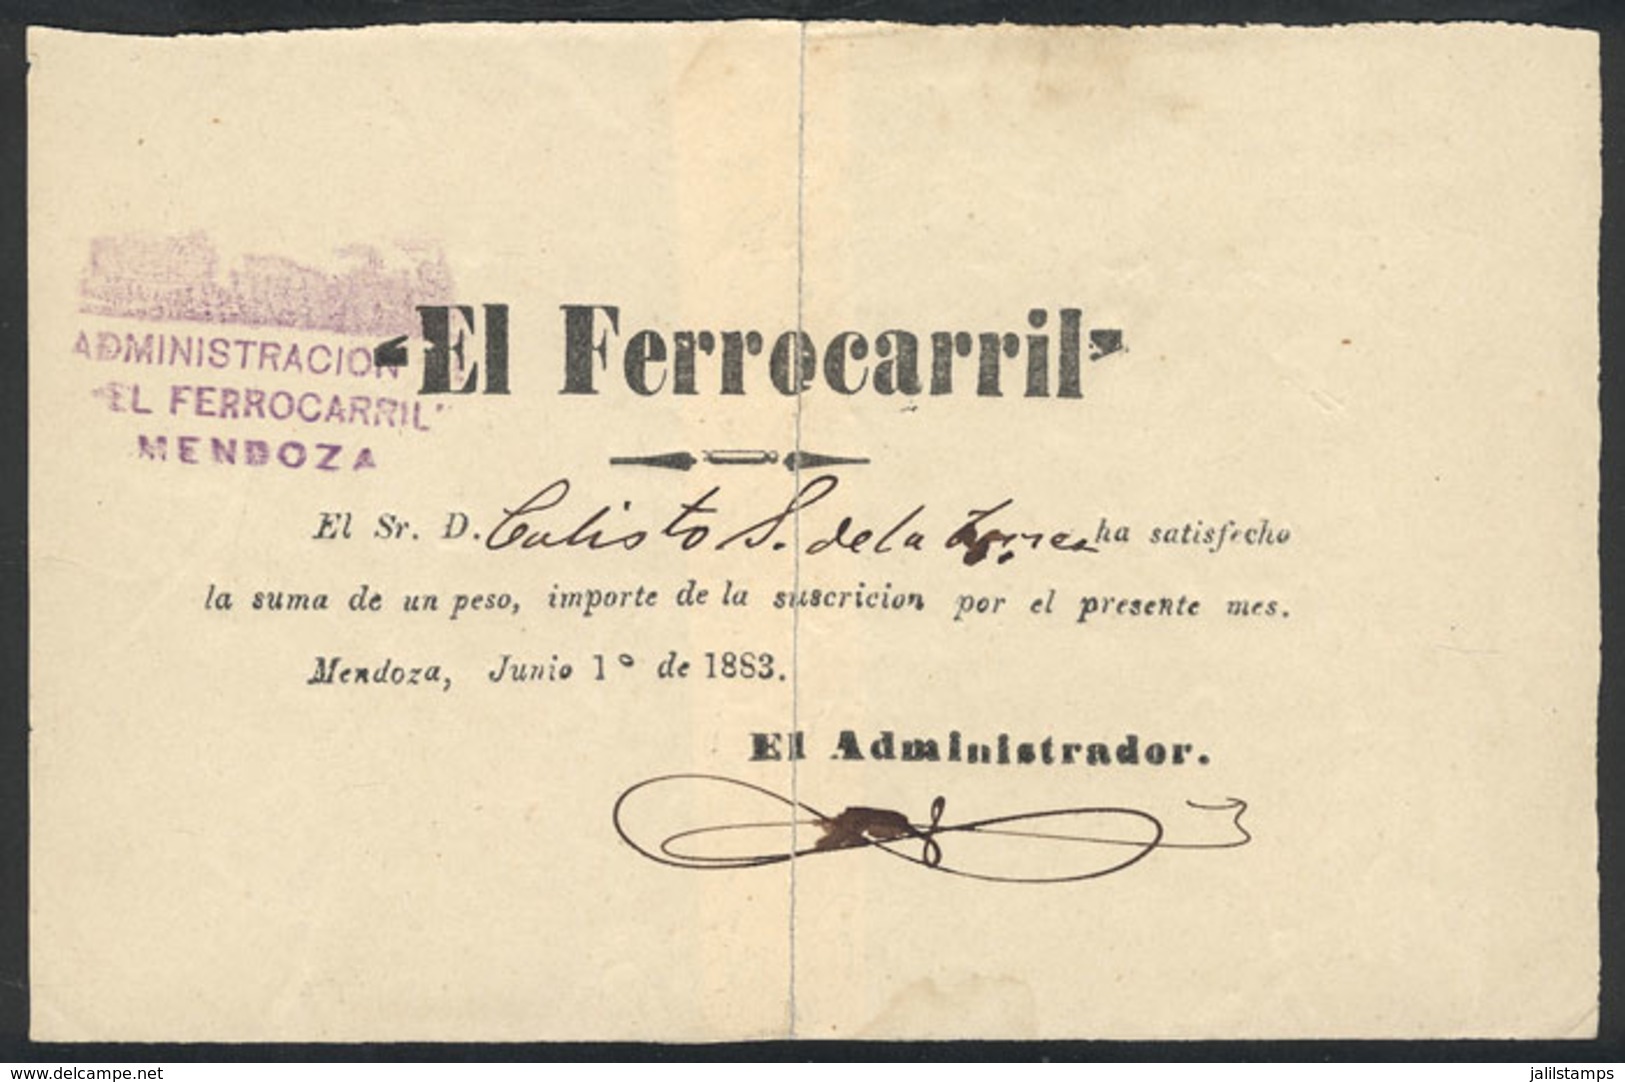 ARGENTINA: Receipt For A Suscription To The Newspaper EL FERROCARRIL Of Mendoza During June 1883, Torn In 2 And Repaired - Manuscritos